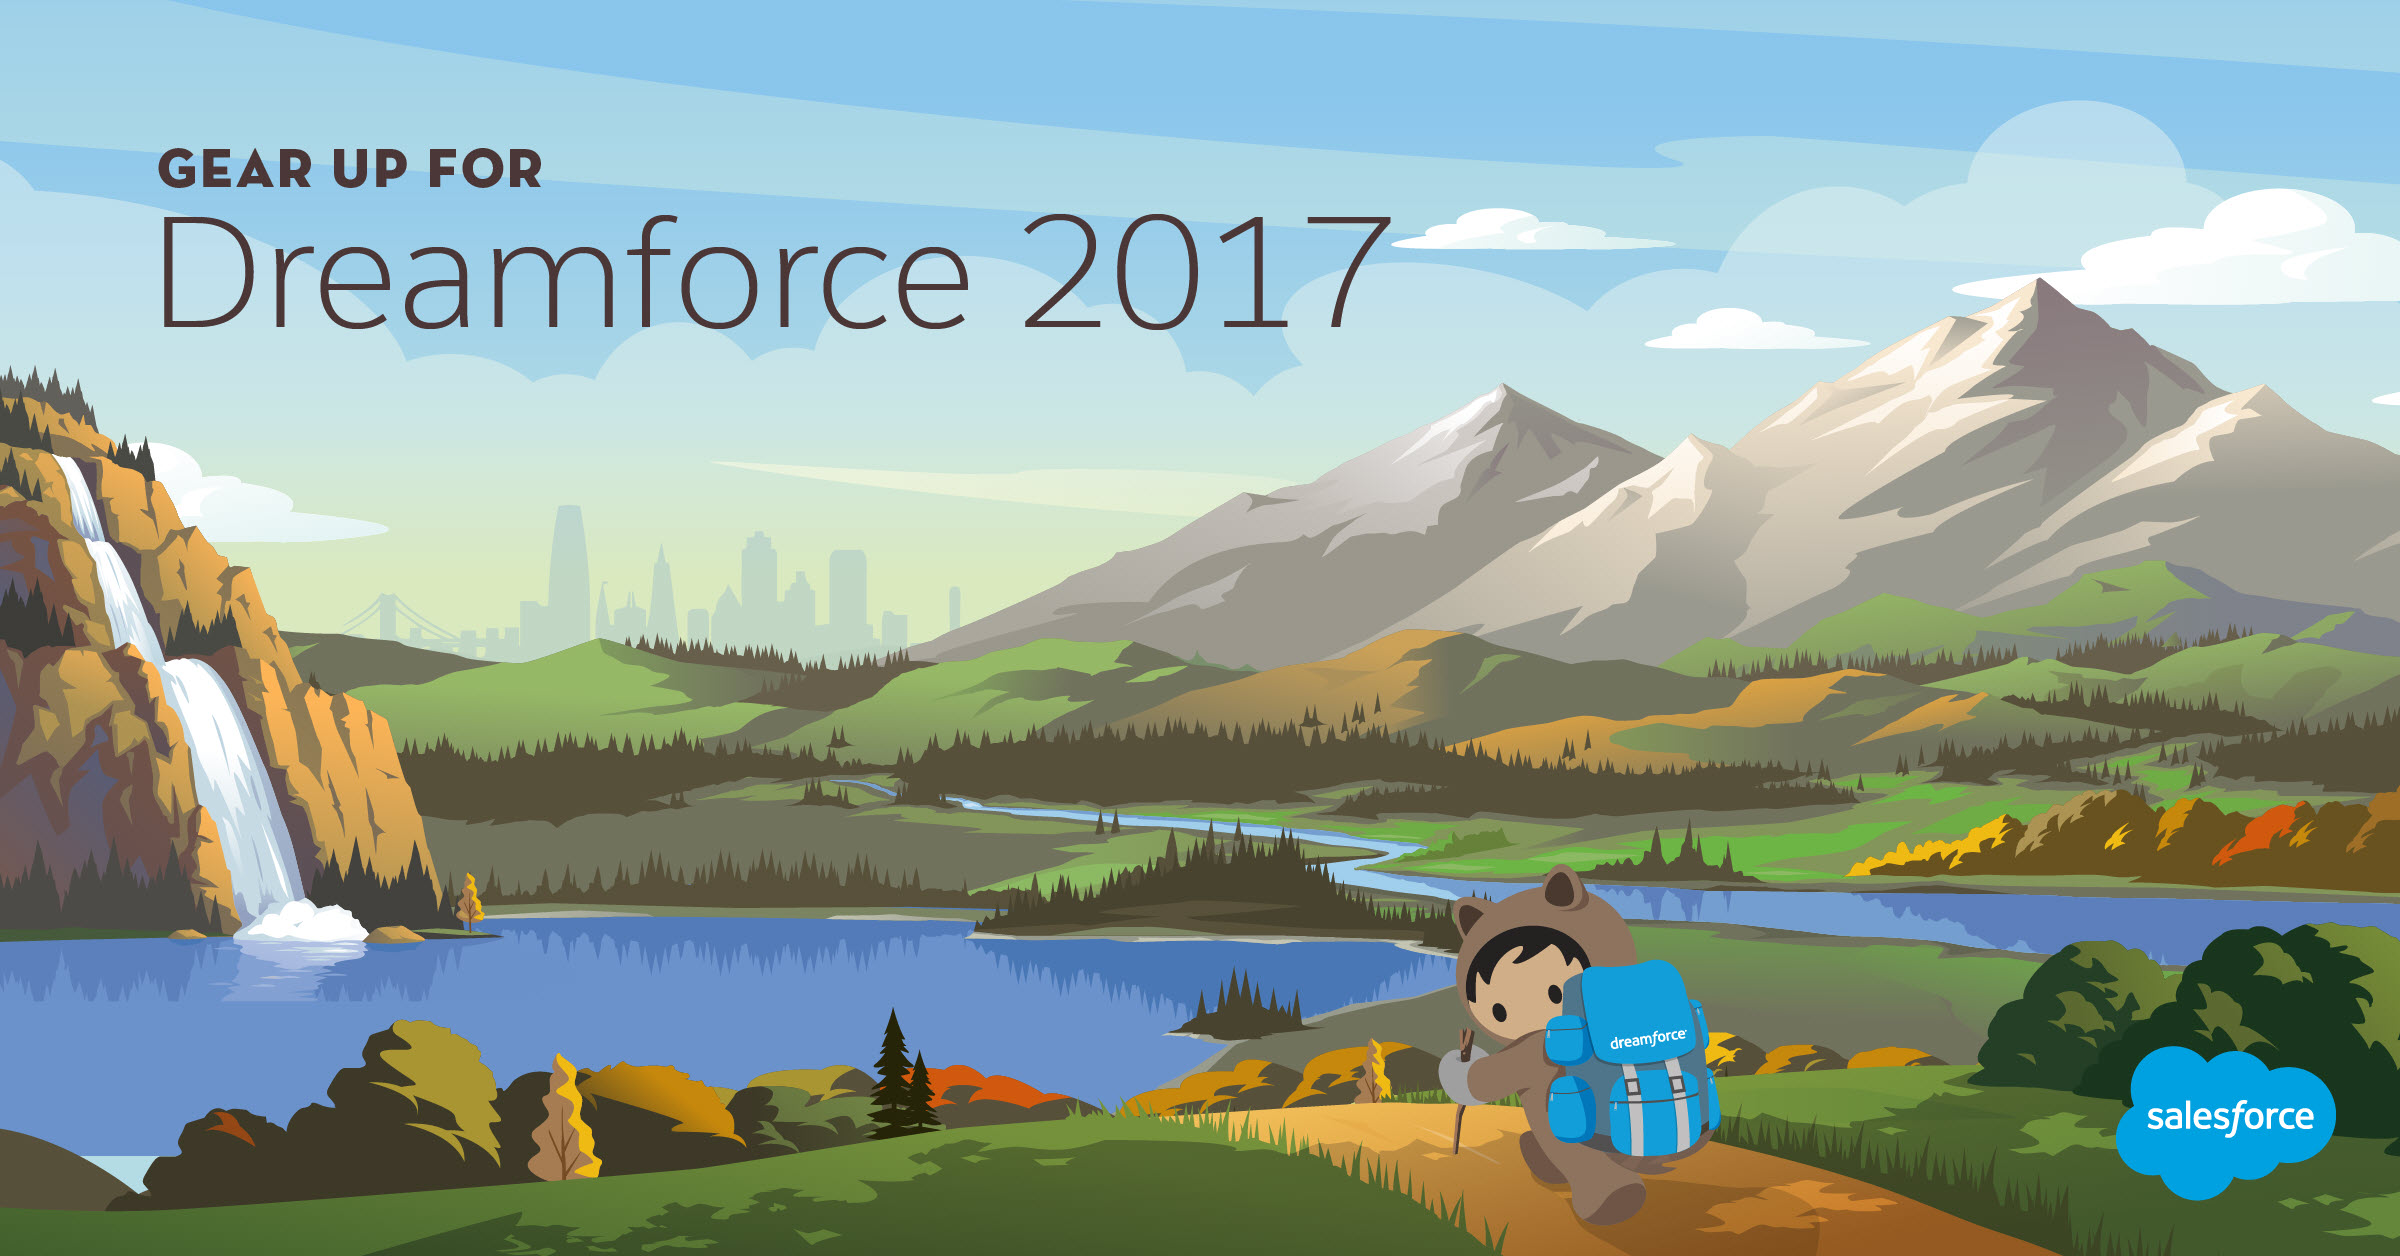 Dreamforce 2017: Gear up for the Biggest Customer Service Event of the Year